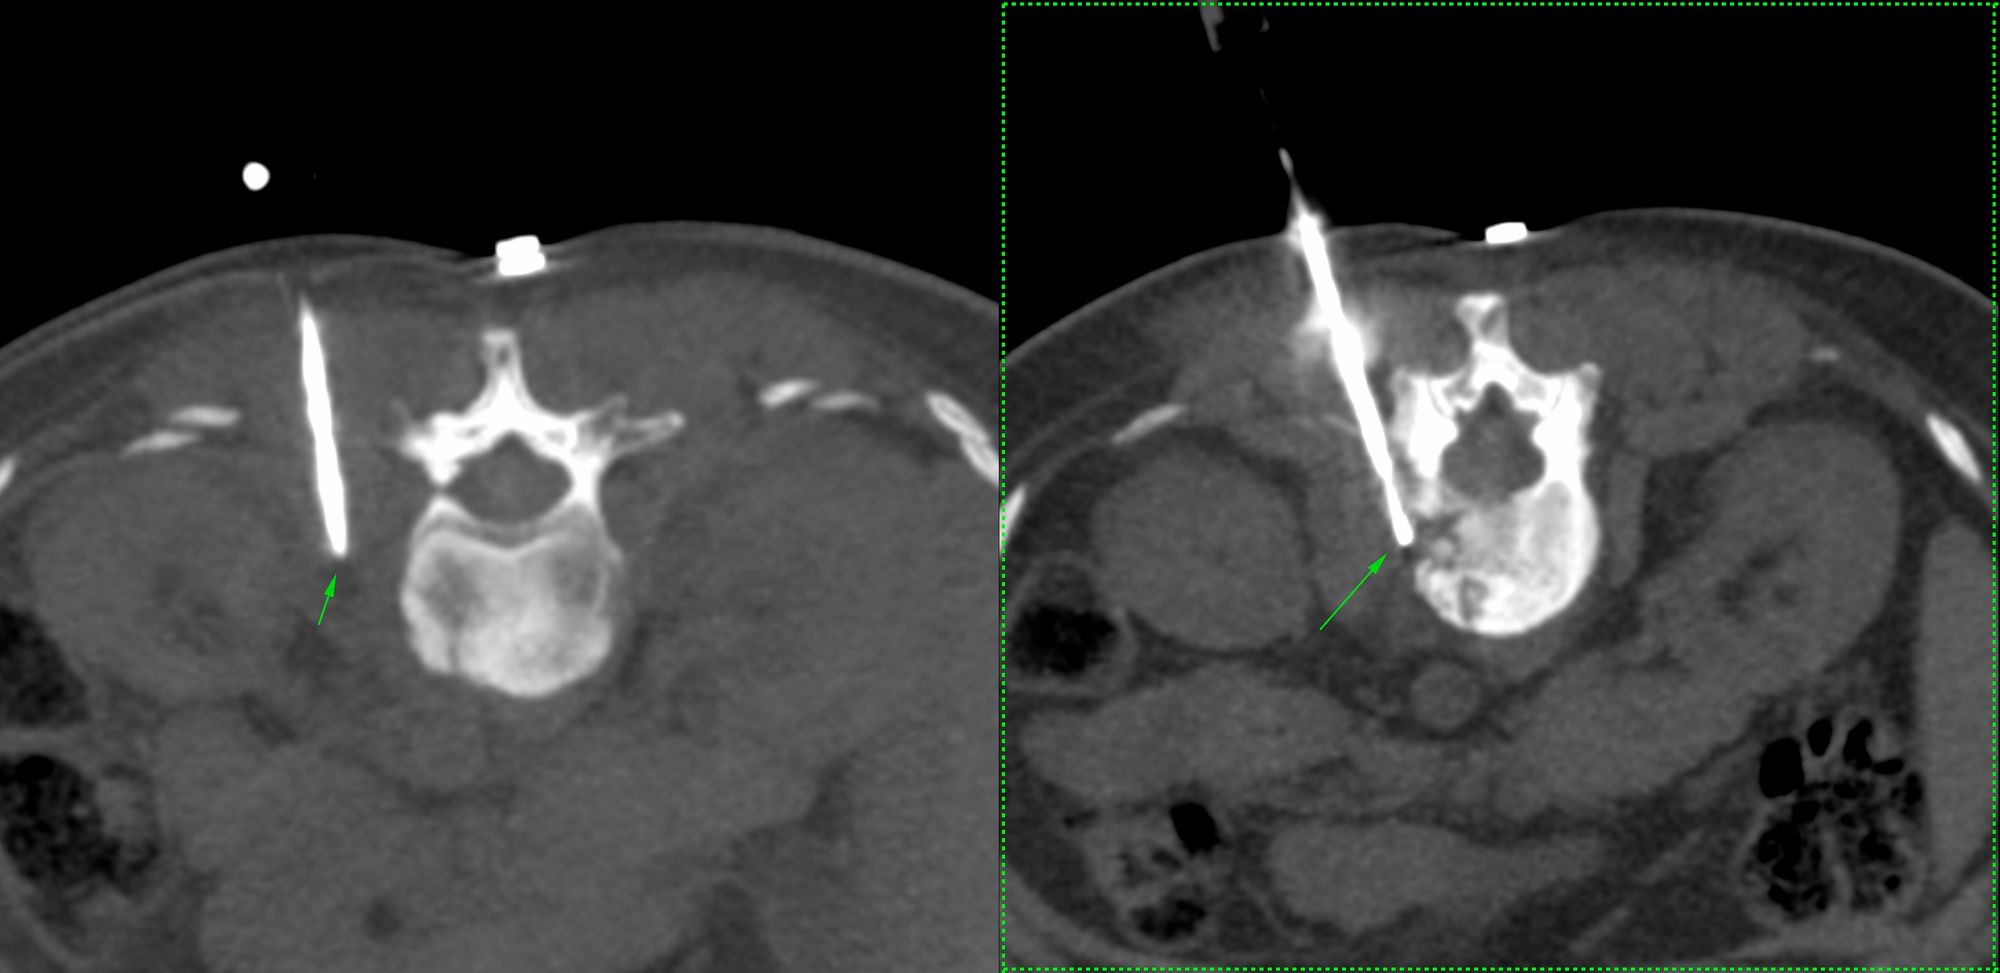 Case 3: Multifocal spine lesions - infectious spondylitis, likely tuberculosis